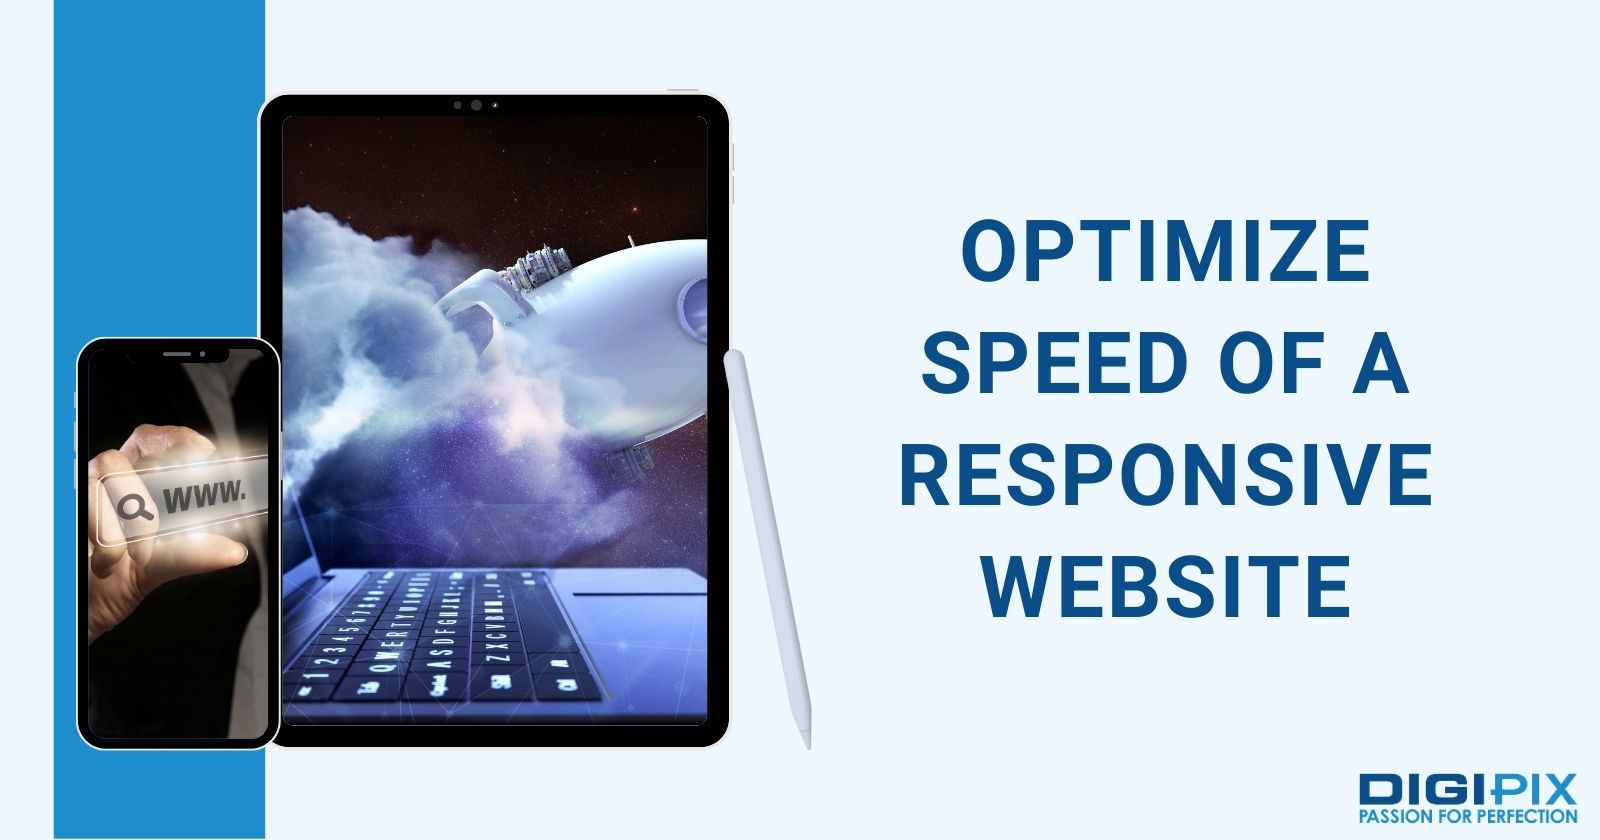 How to Optimize Speed of a Website